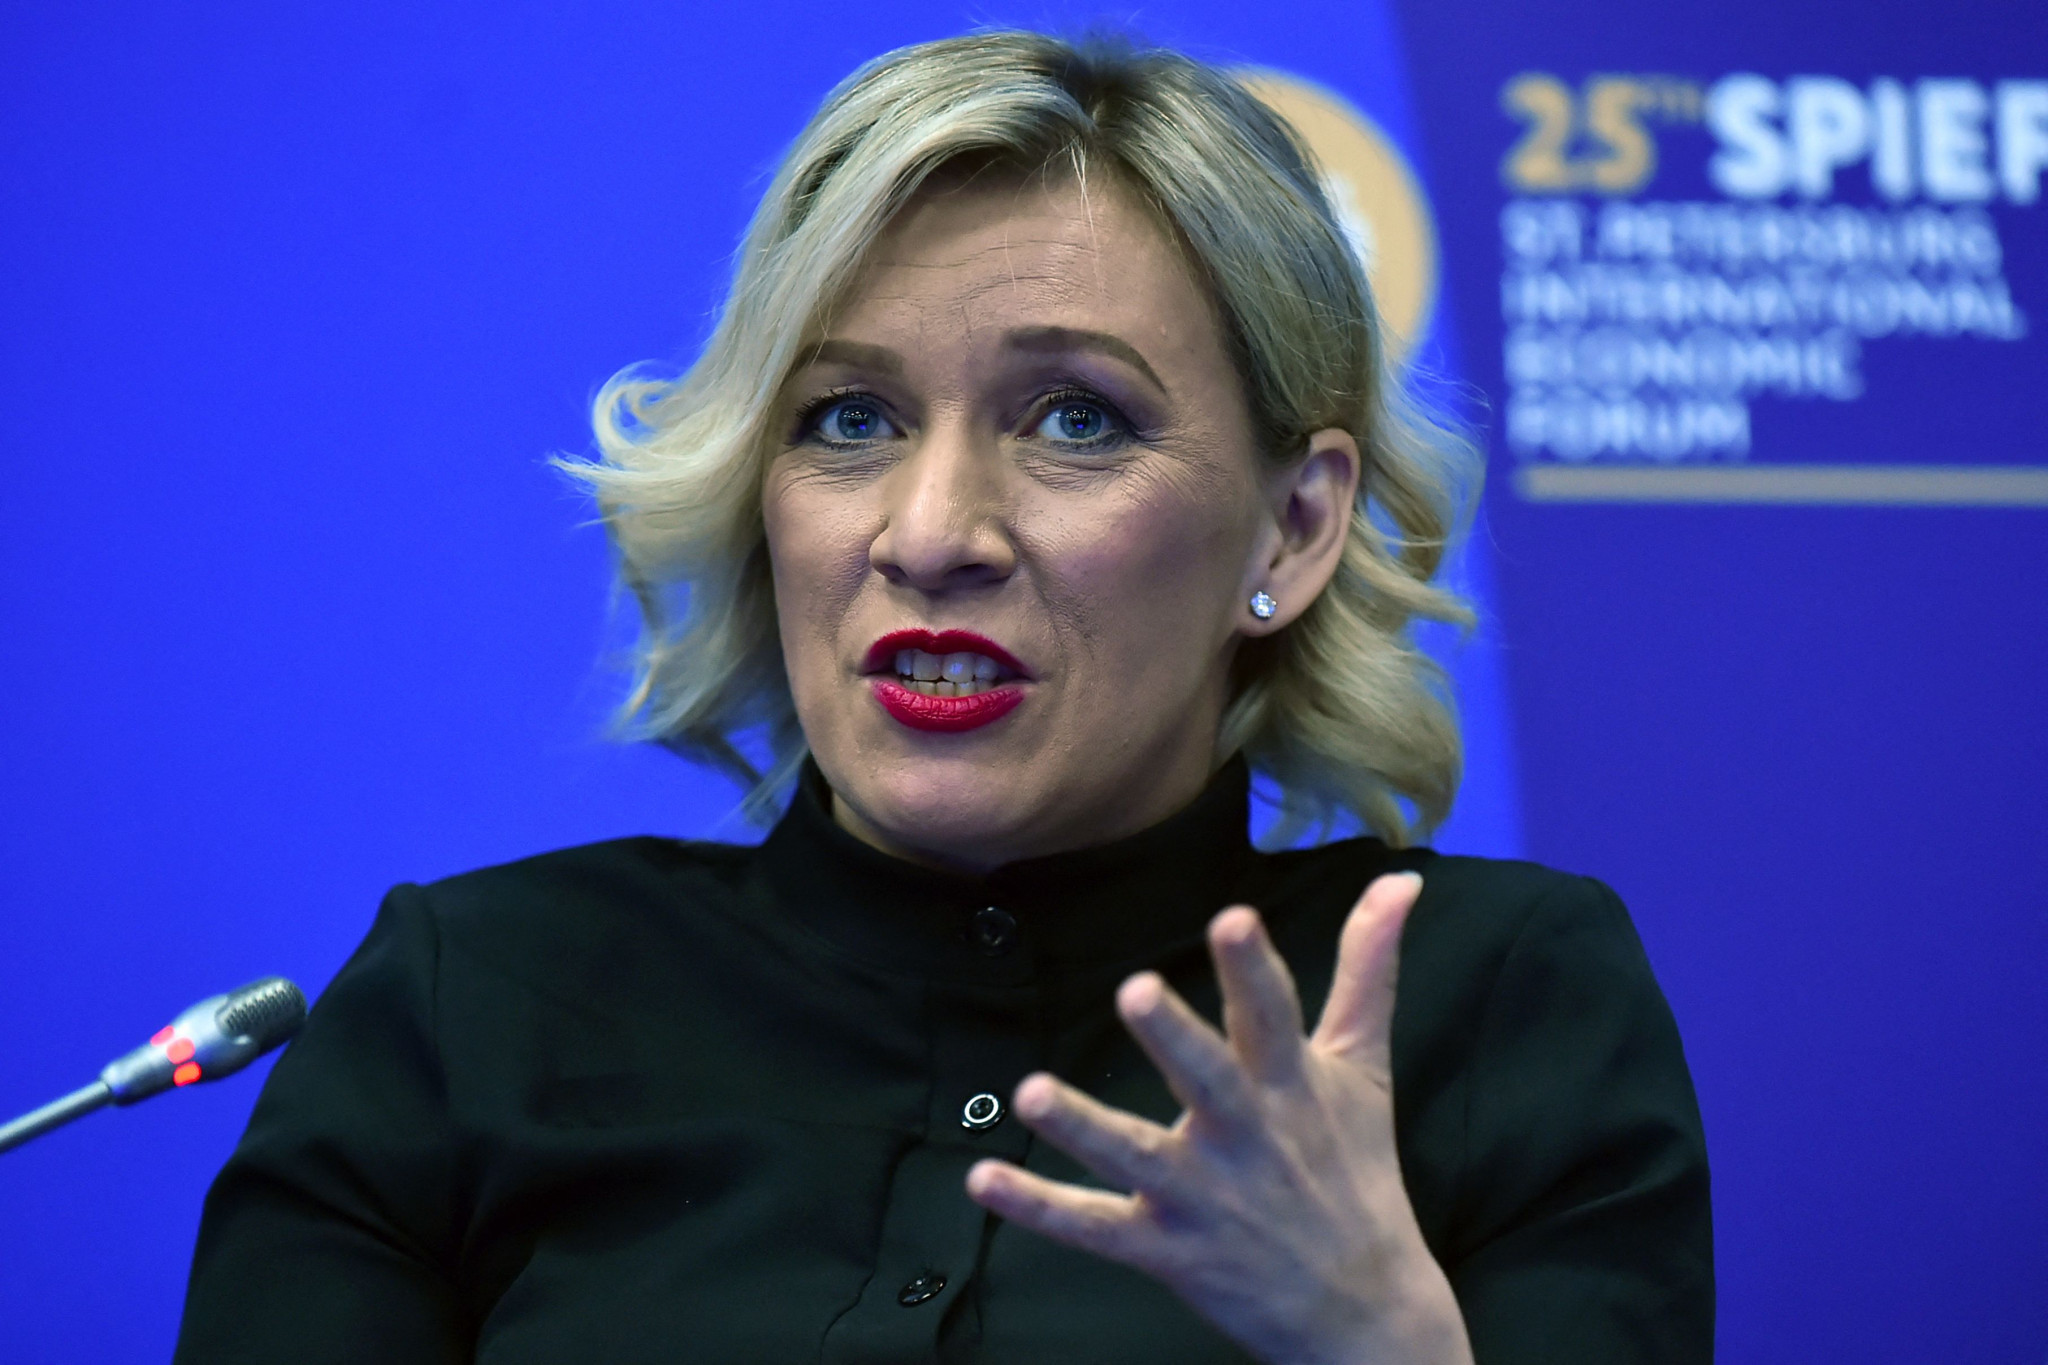 Russian Foreign Ministrey spokeswoman Maria Zakharova claimed the IOC decision showed it is 